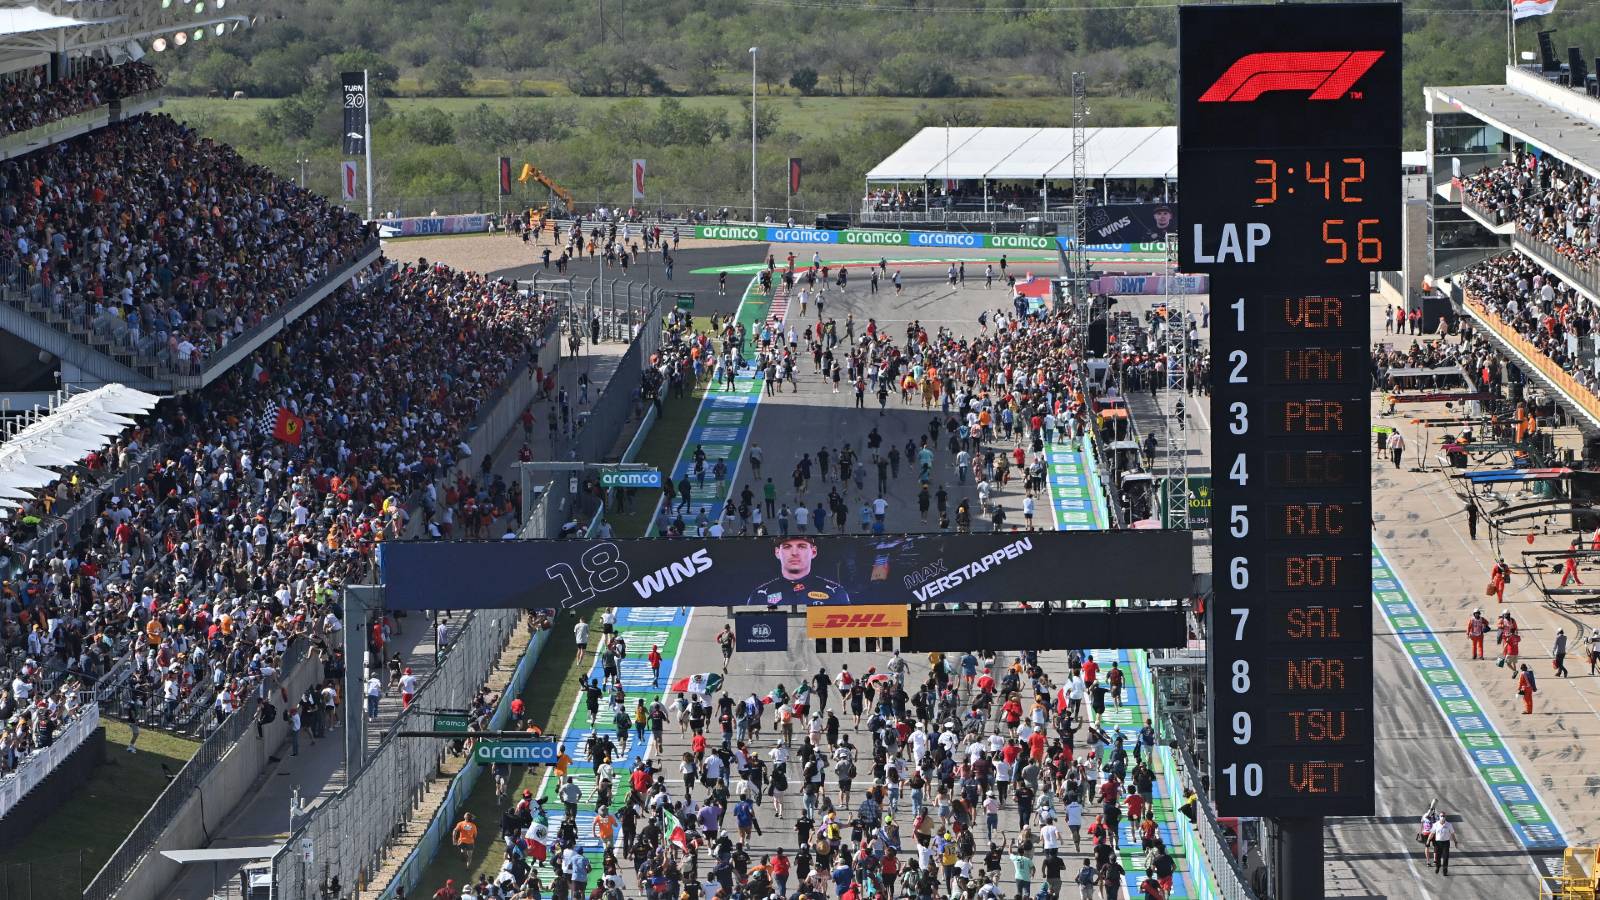 Fans invade the track after the US GP. Austin October 2021.